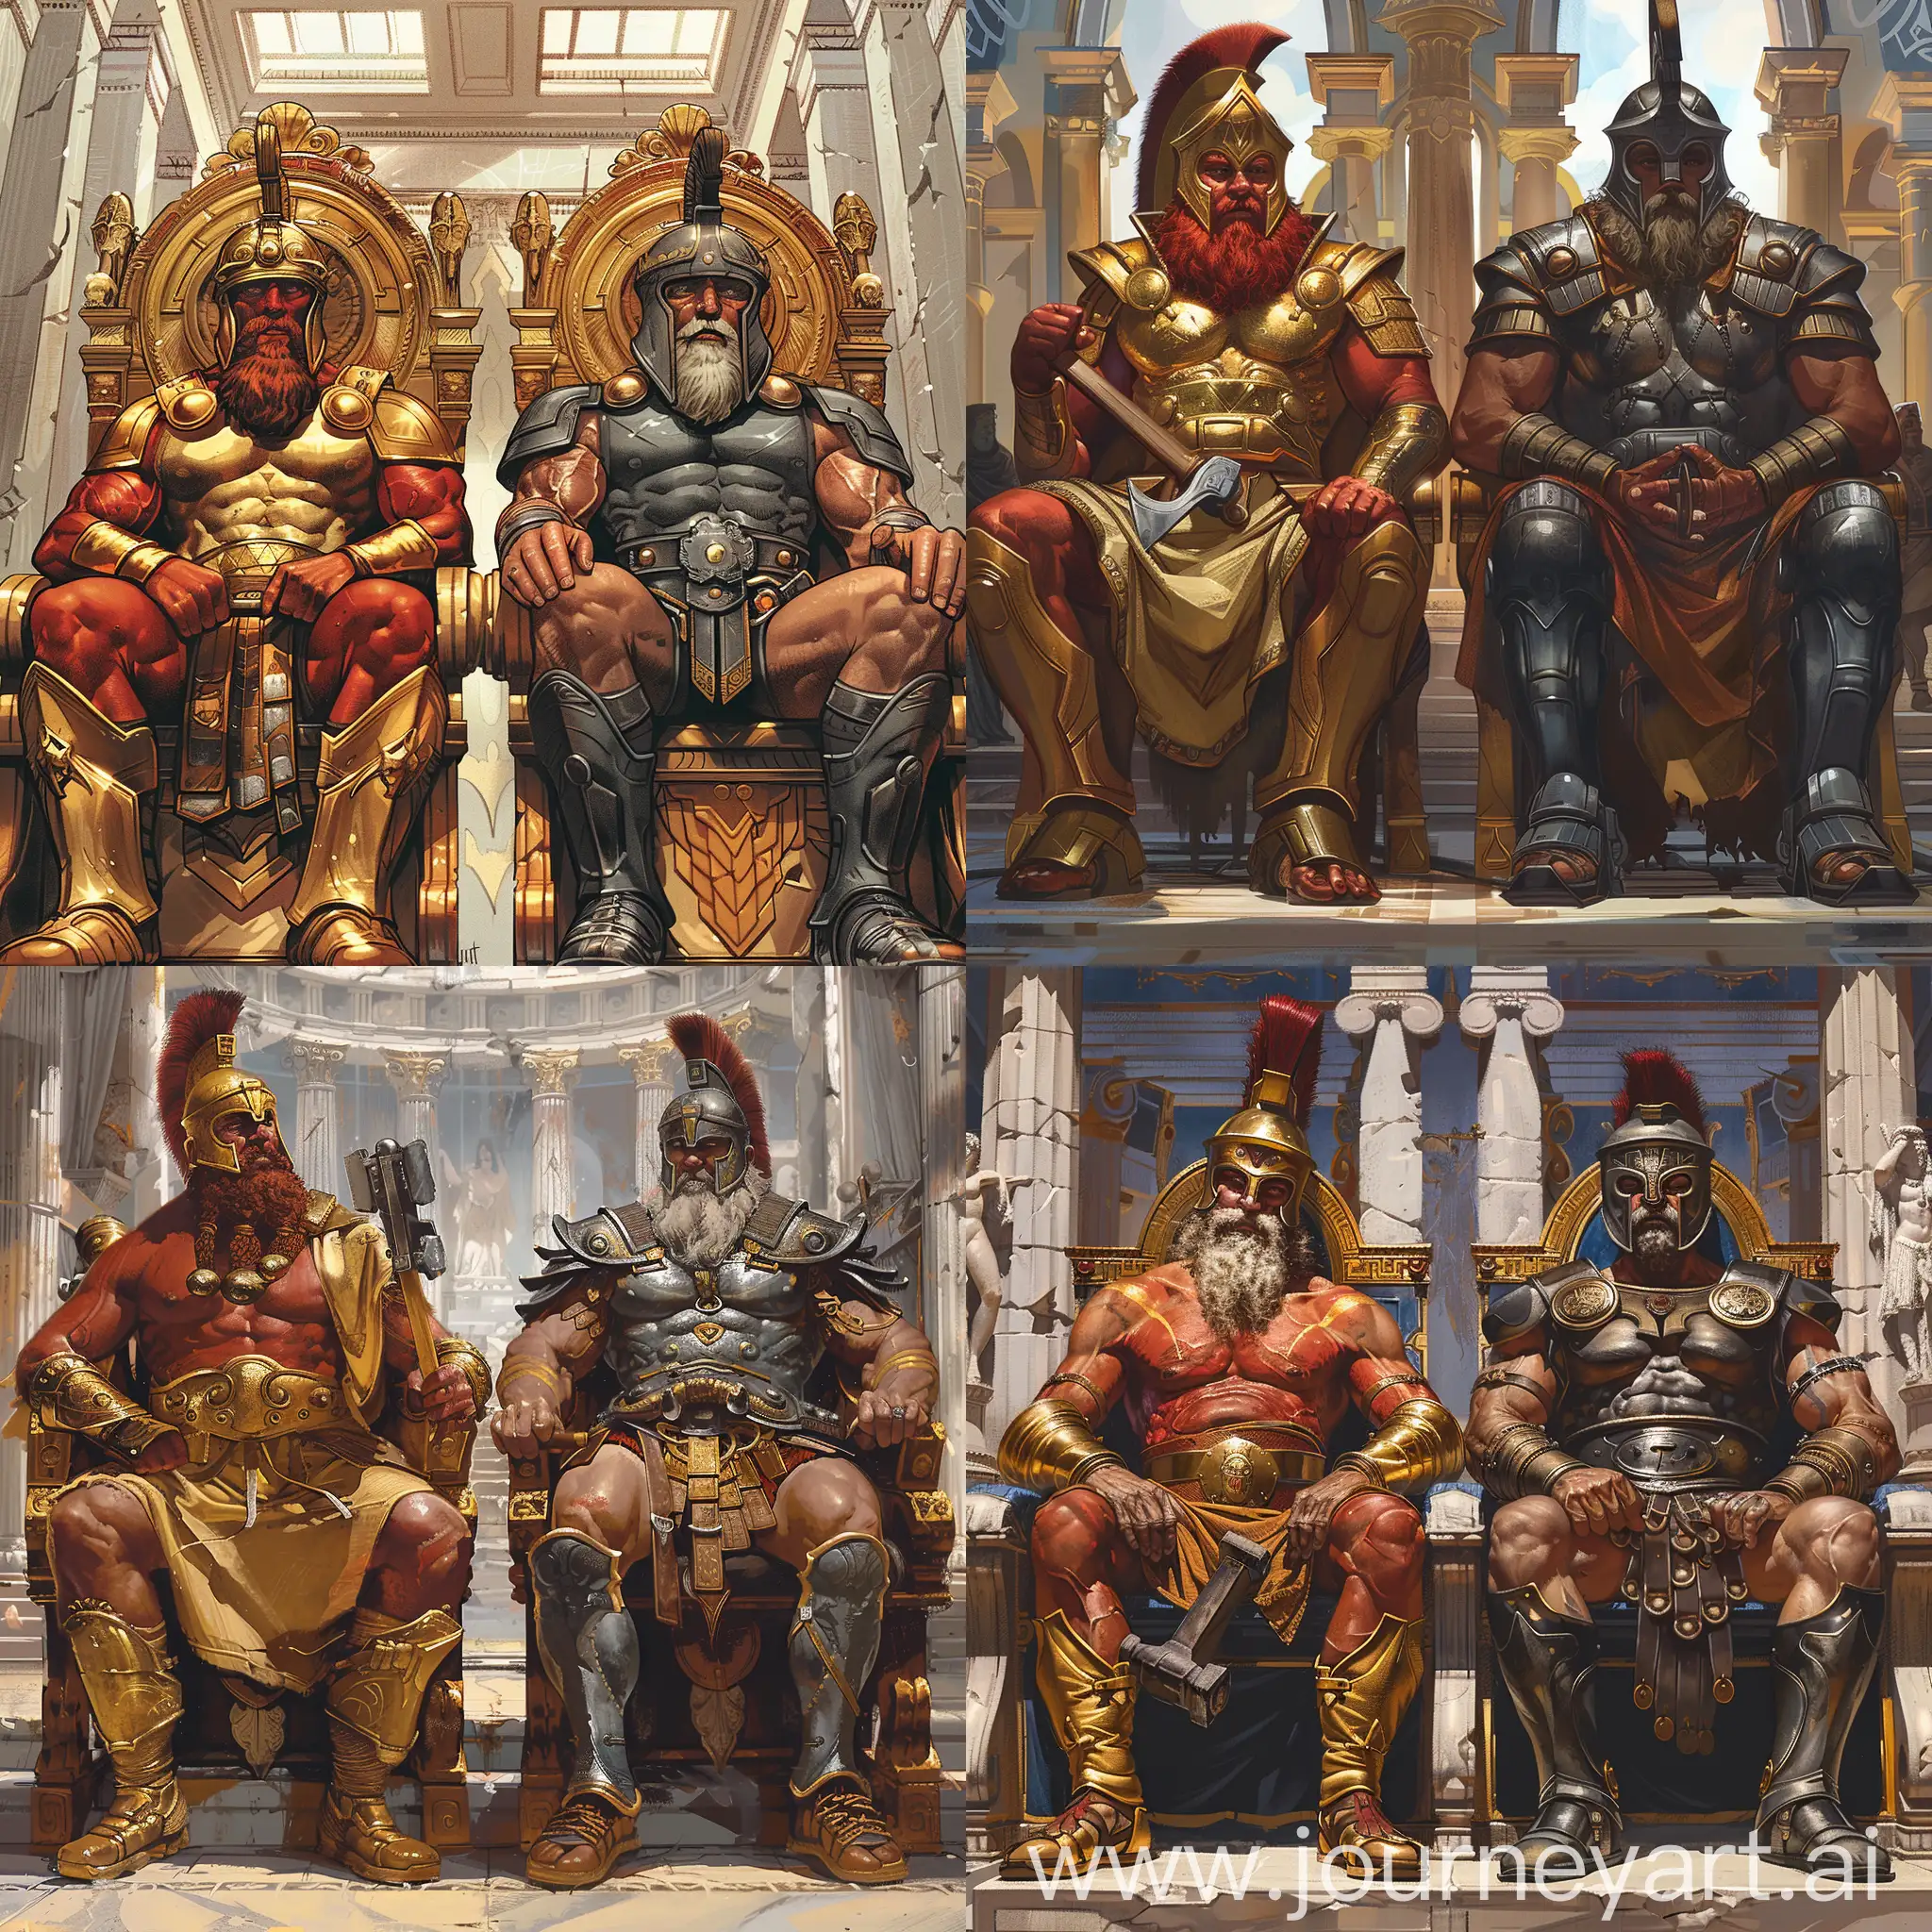 Two middle-aged Greek Gods are sitting on their imperial thrones, they both have beards.

At left, there is red skin Vulcan, Vulcan is in a golden color hat, clothes and boots, Vulcan holds a steel hammer in hands.

At right, there is bronze skin Ares, Ares is in deep gray color helmet, armor and boots, Ares holds a deep gray steel sword in hands.

They are both inside a splendid greek temple.